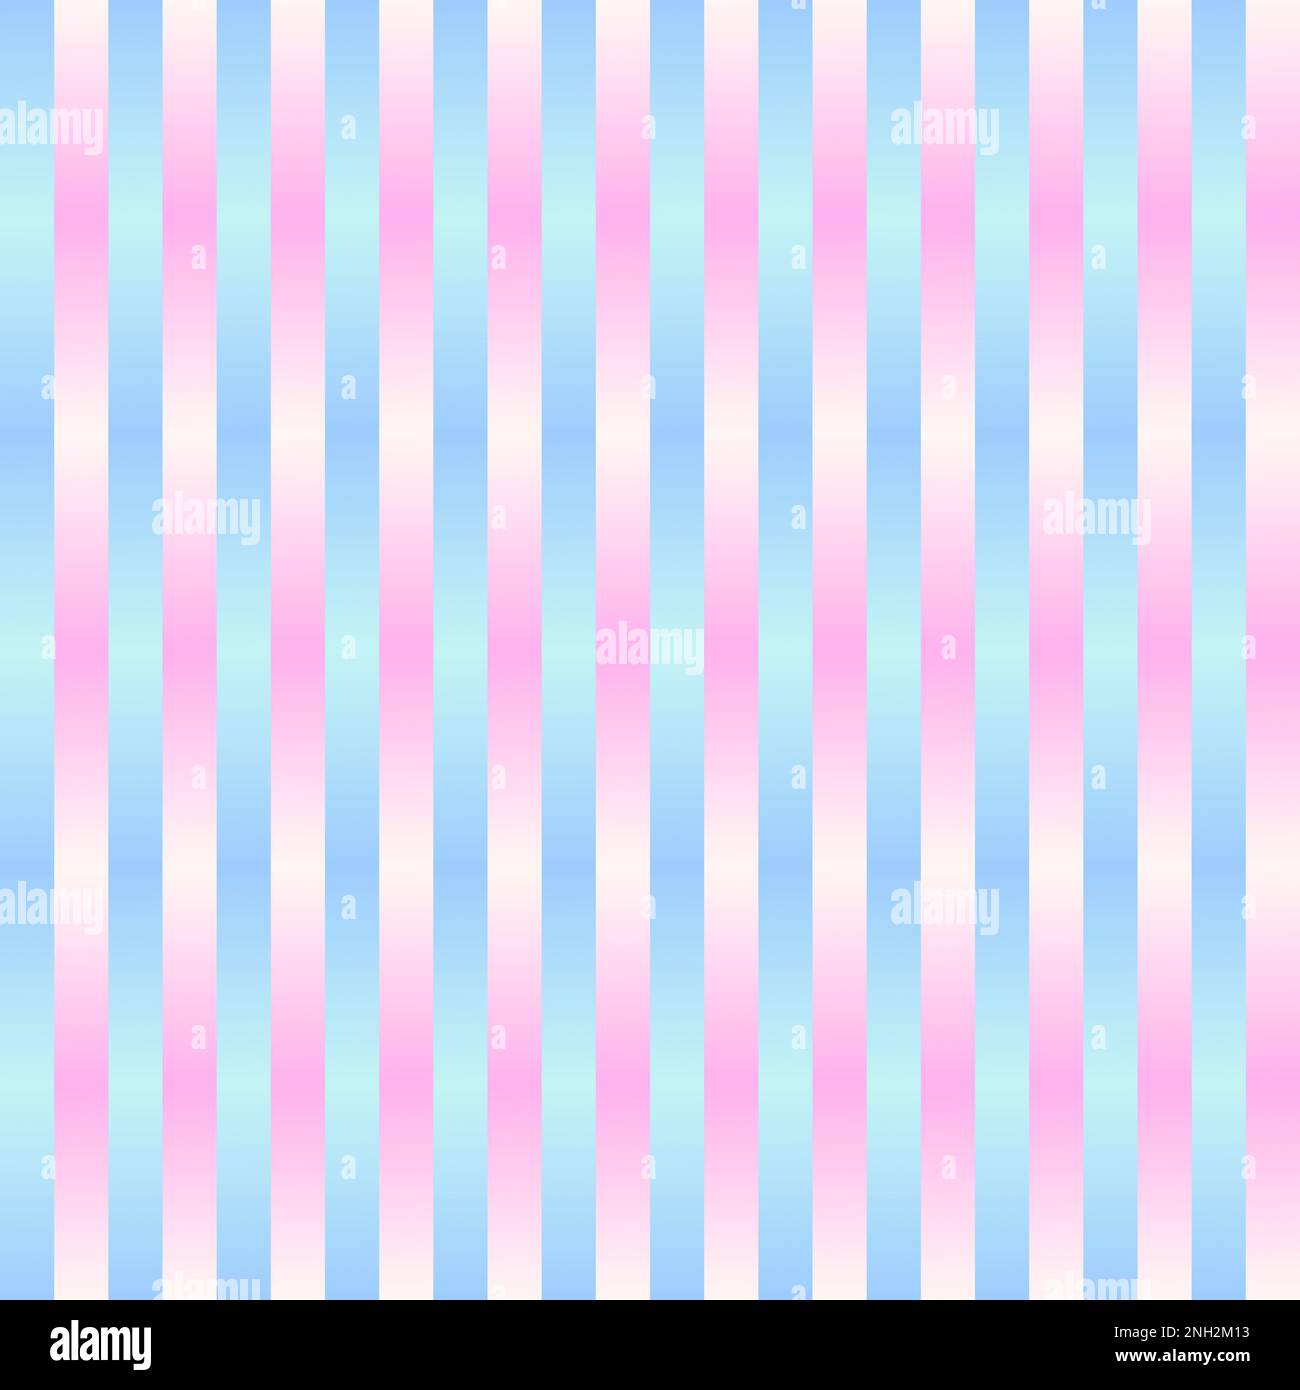 Vertical interwoven stripes seamlessly repeating wallpaper pattern Stock Photo